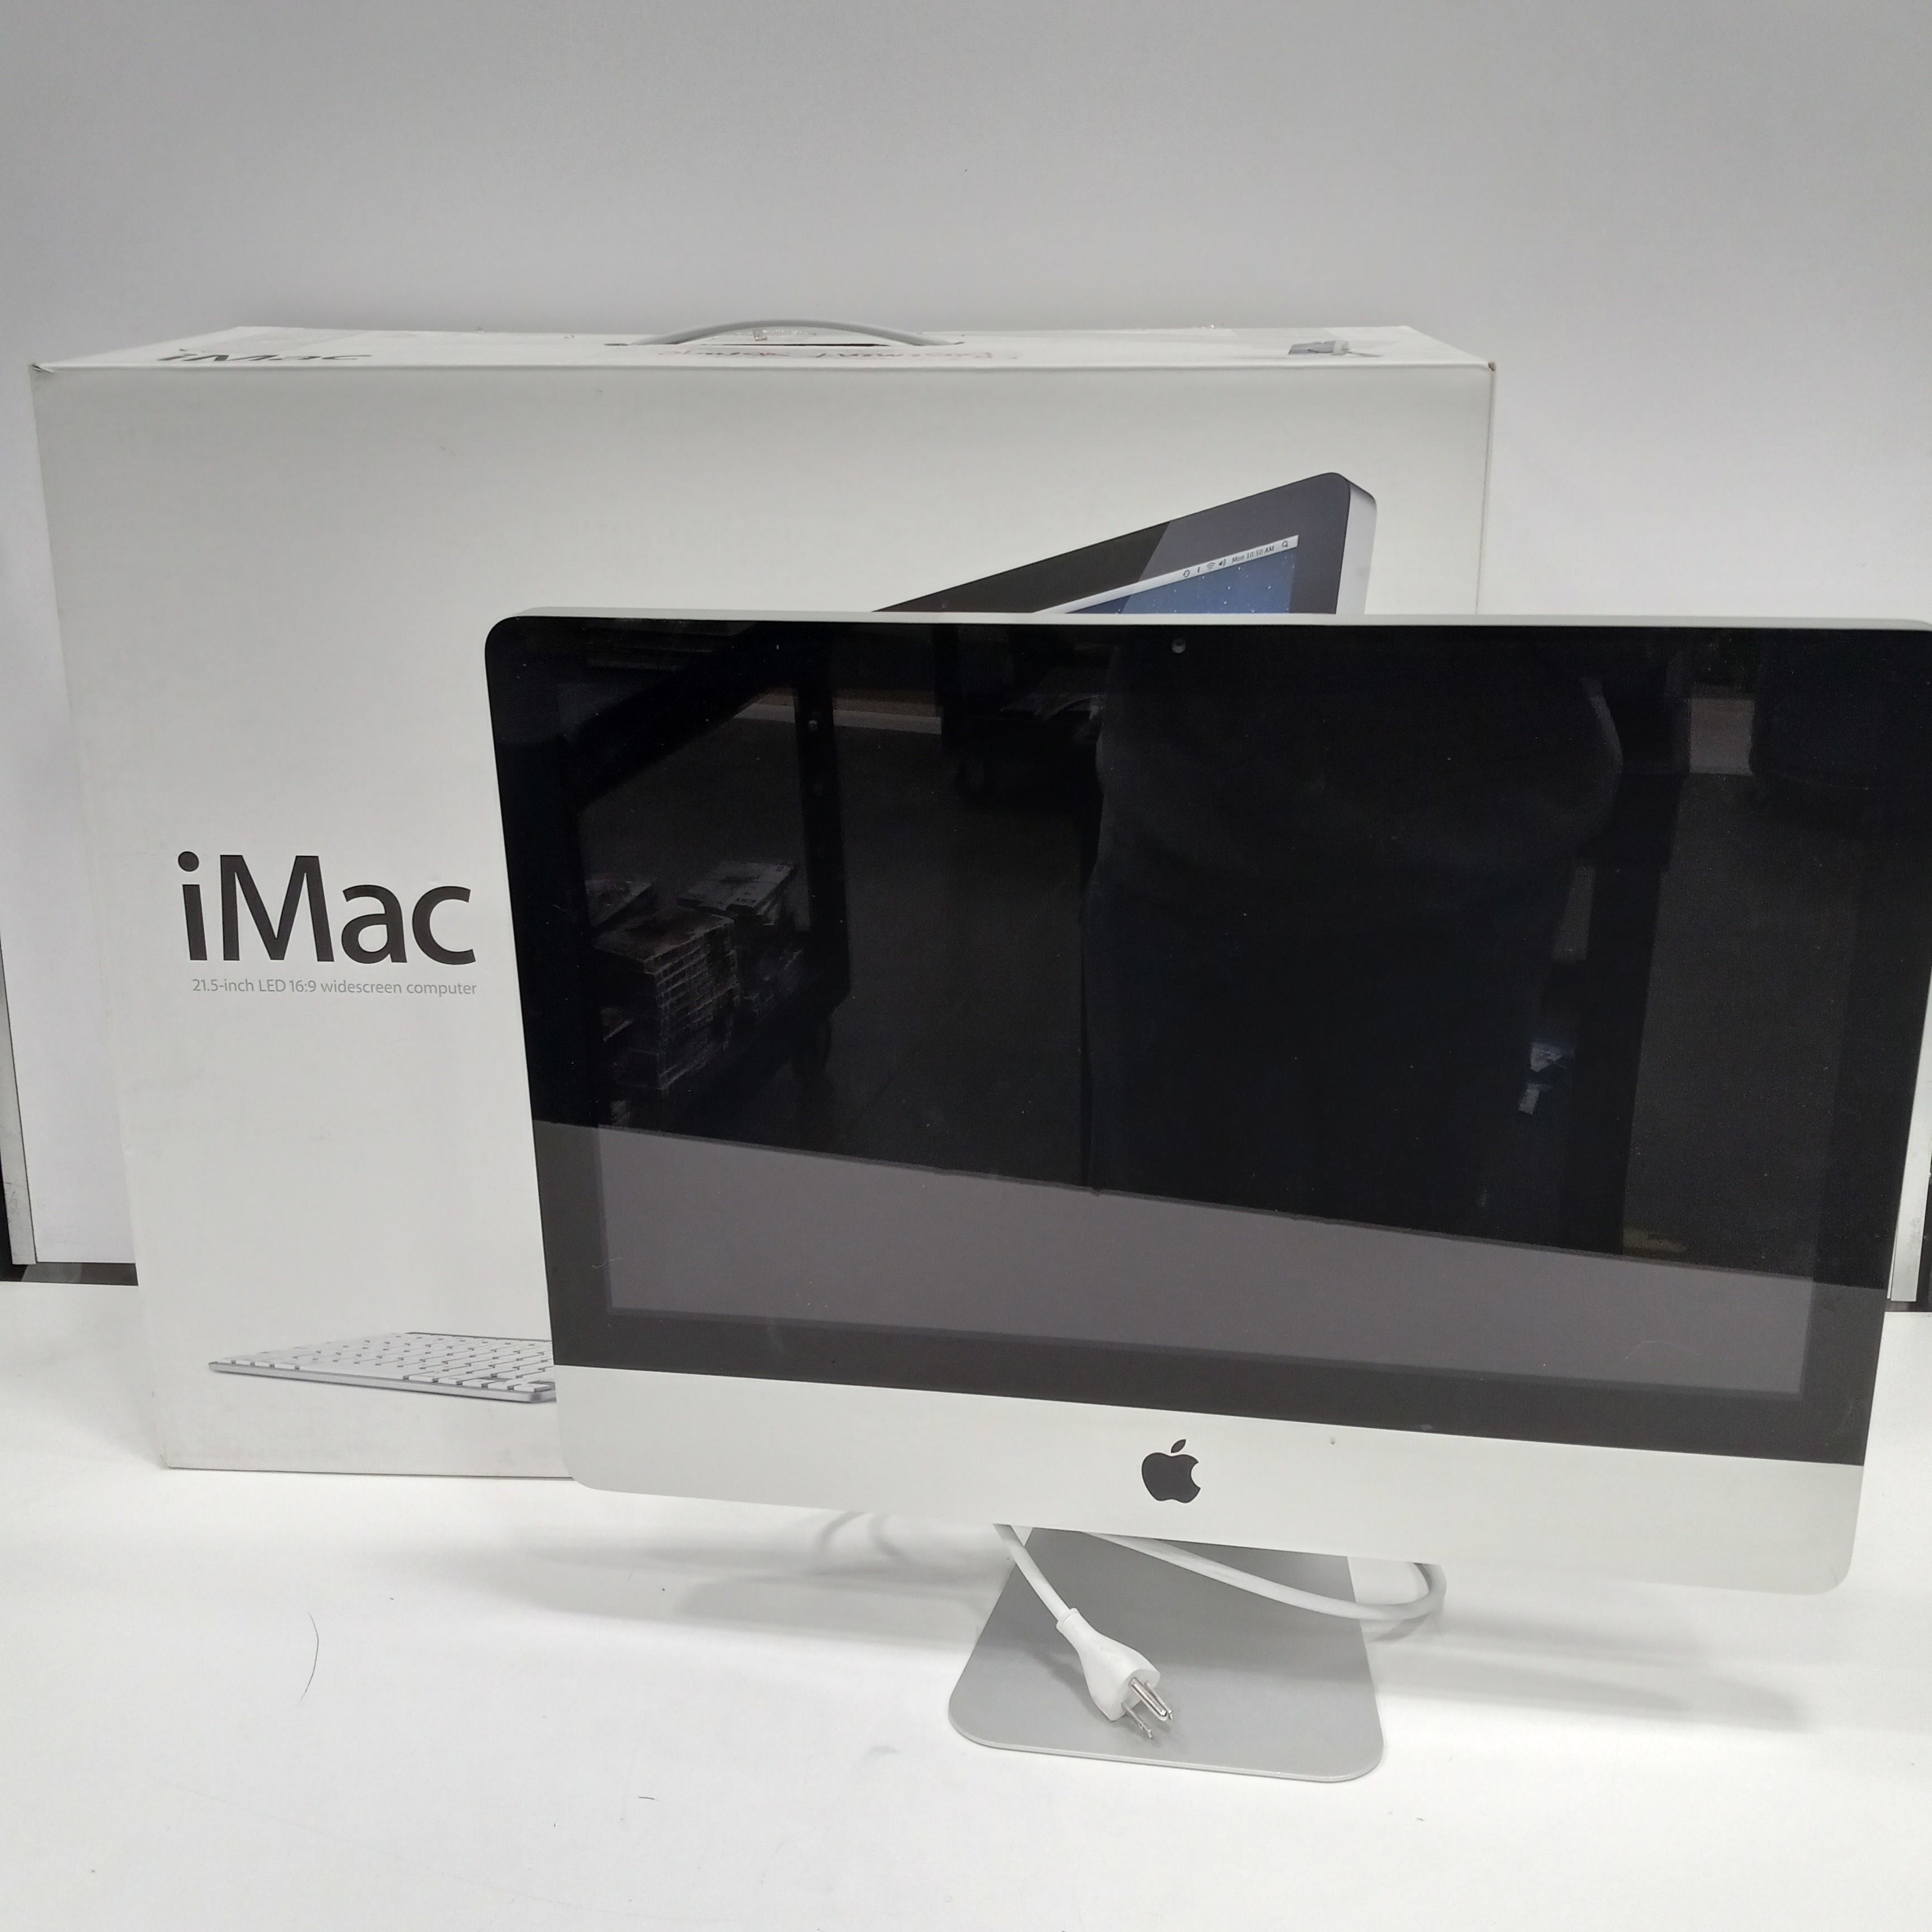 Buy Apple iMac 21.5 inchs Computer In Box for USD 199.99 | GoodwillFinds